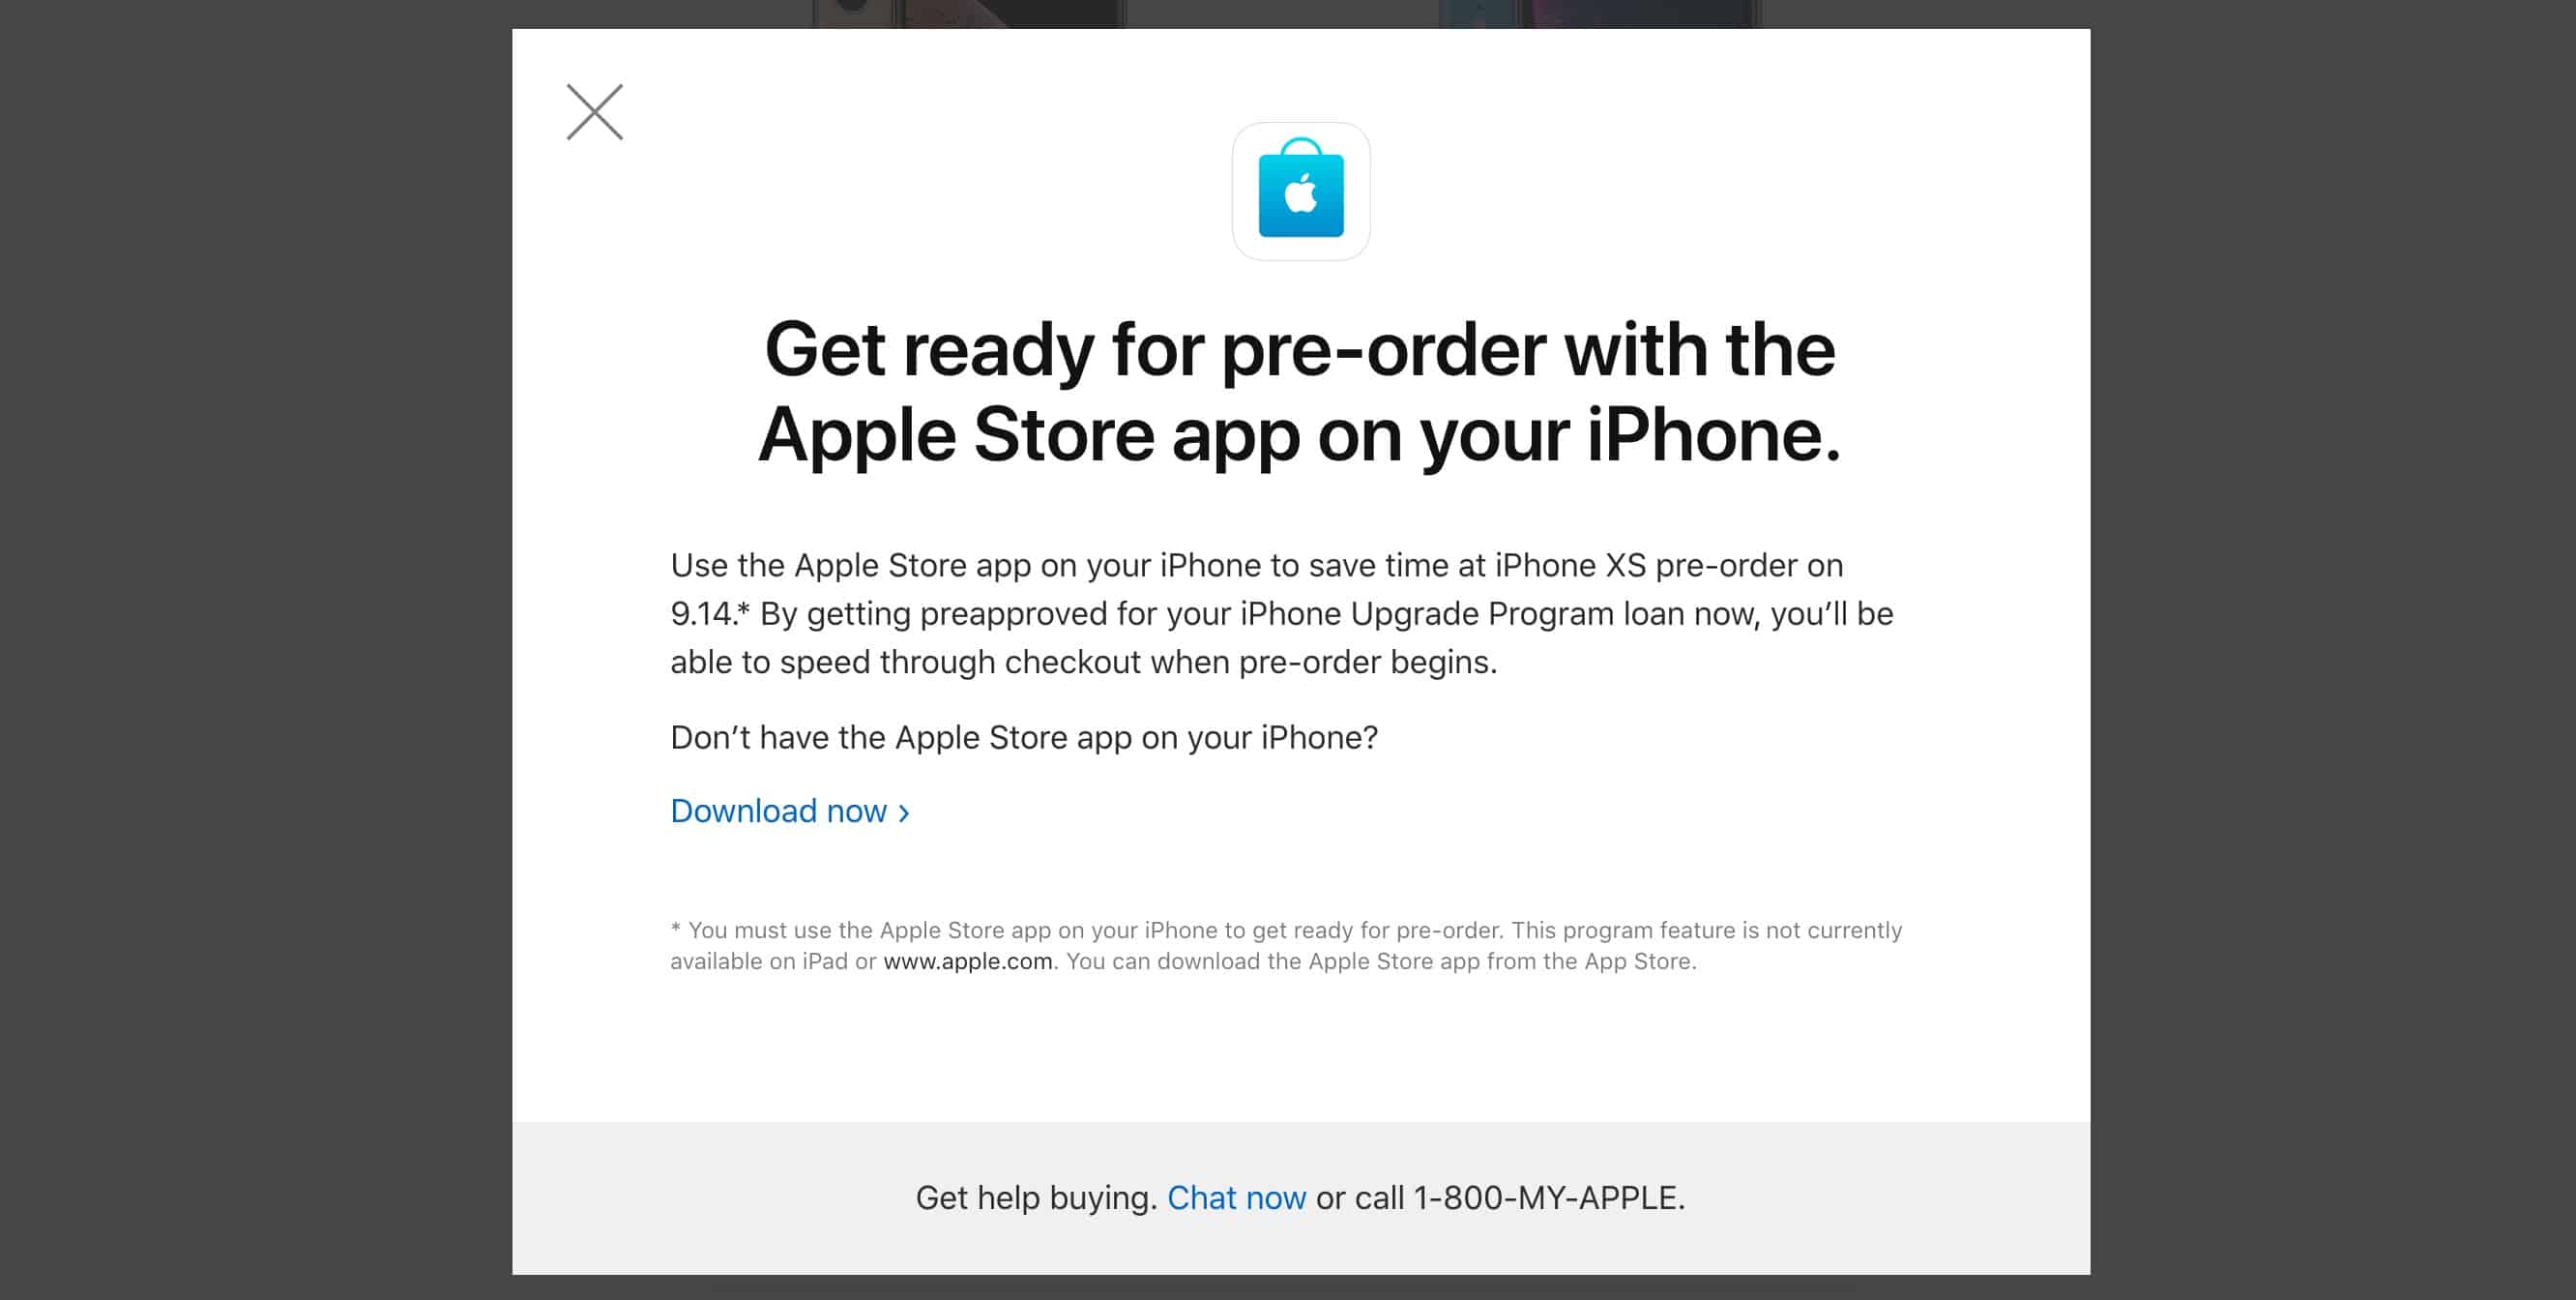 The Apple Store app is the best way to pre-order a new iPhone XS.